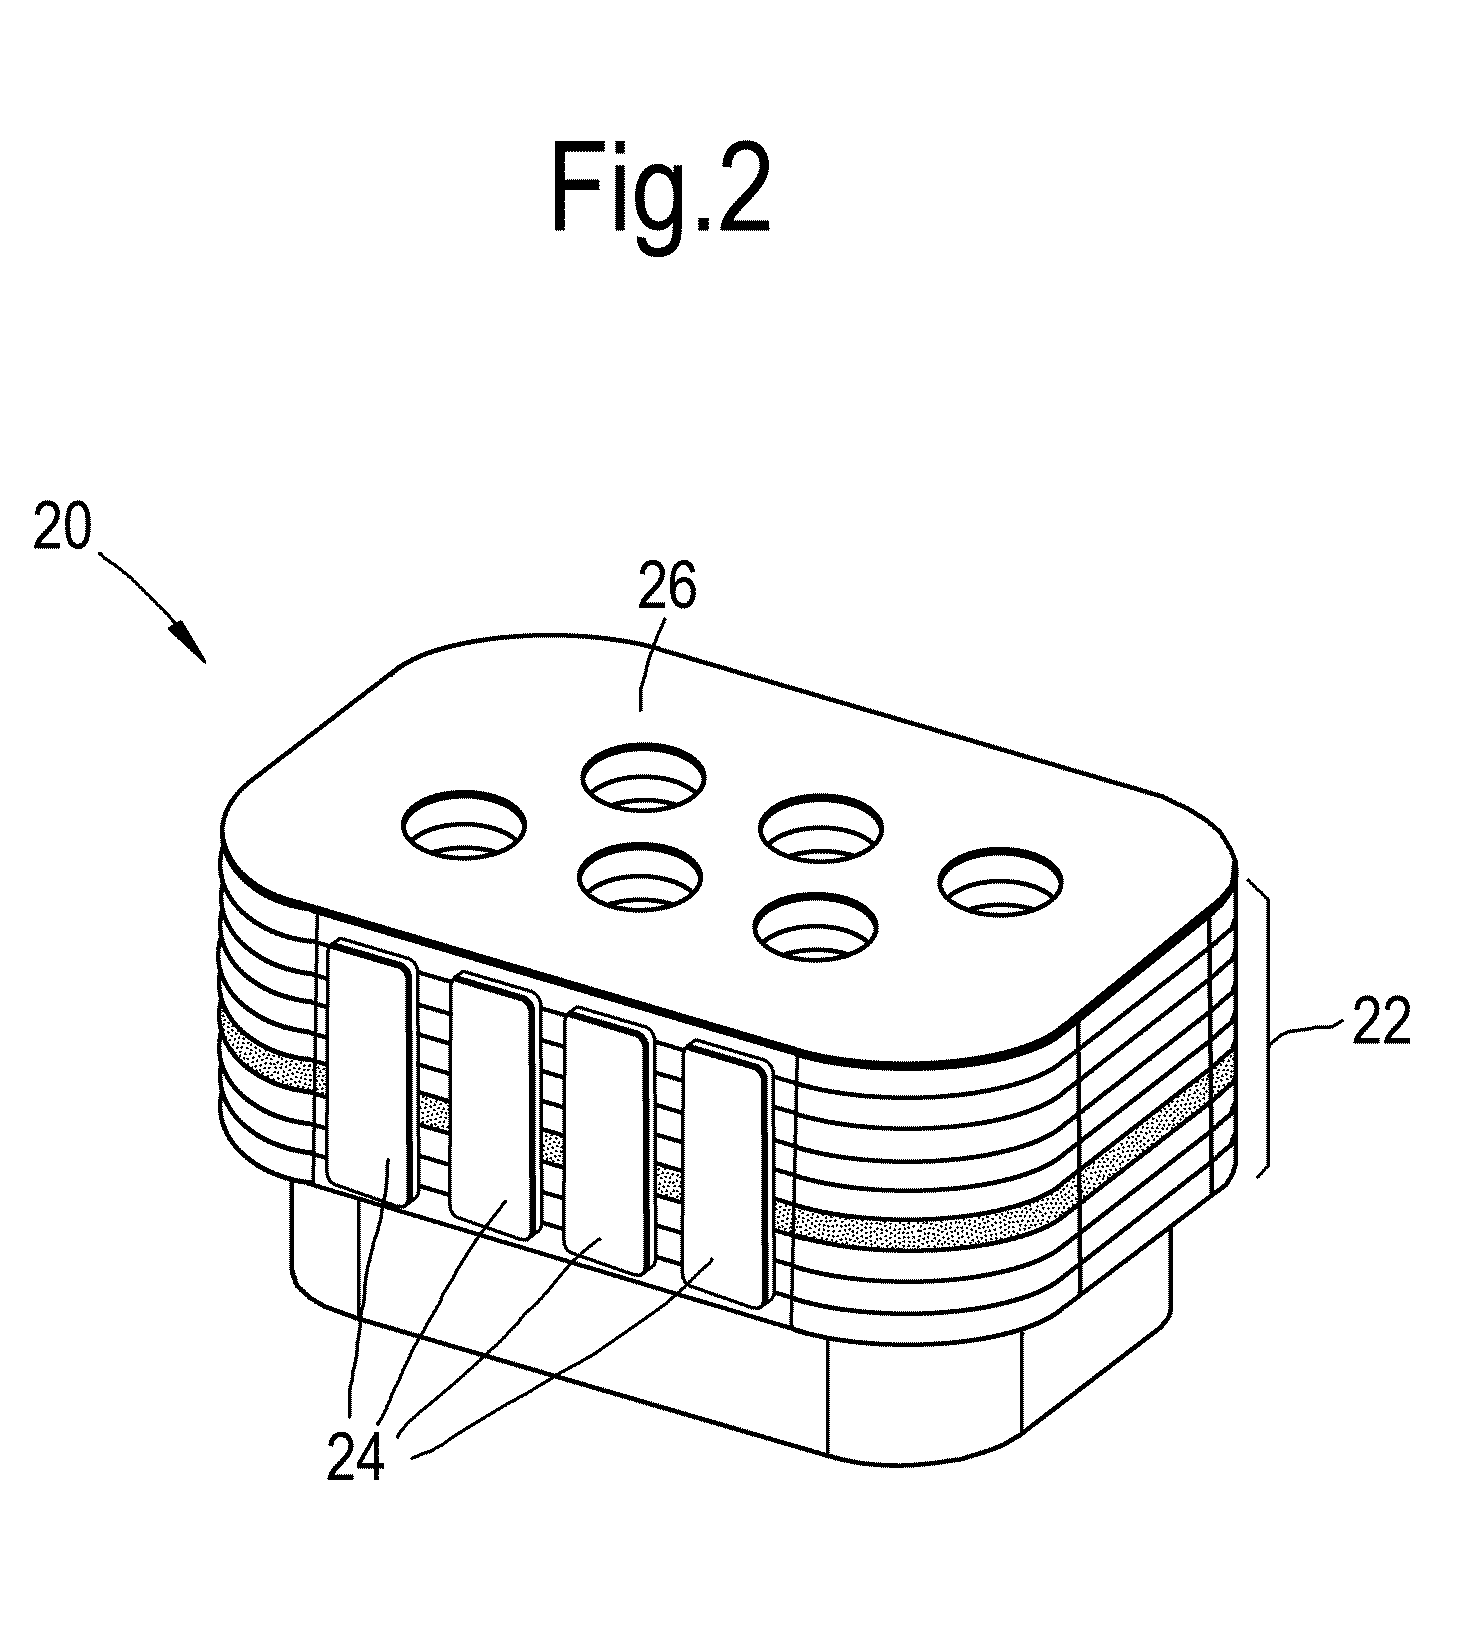 Method for manufacturing large ceramic co-fired articles